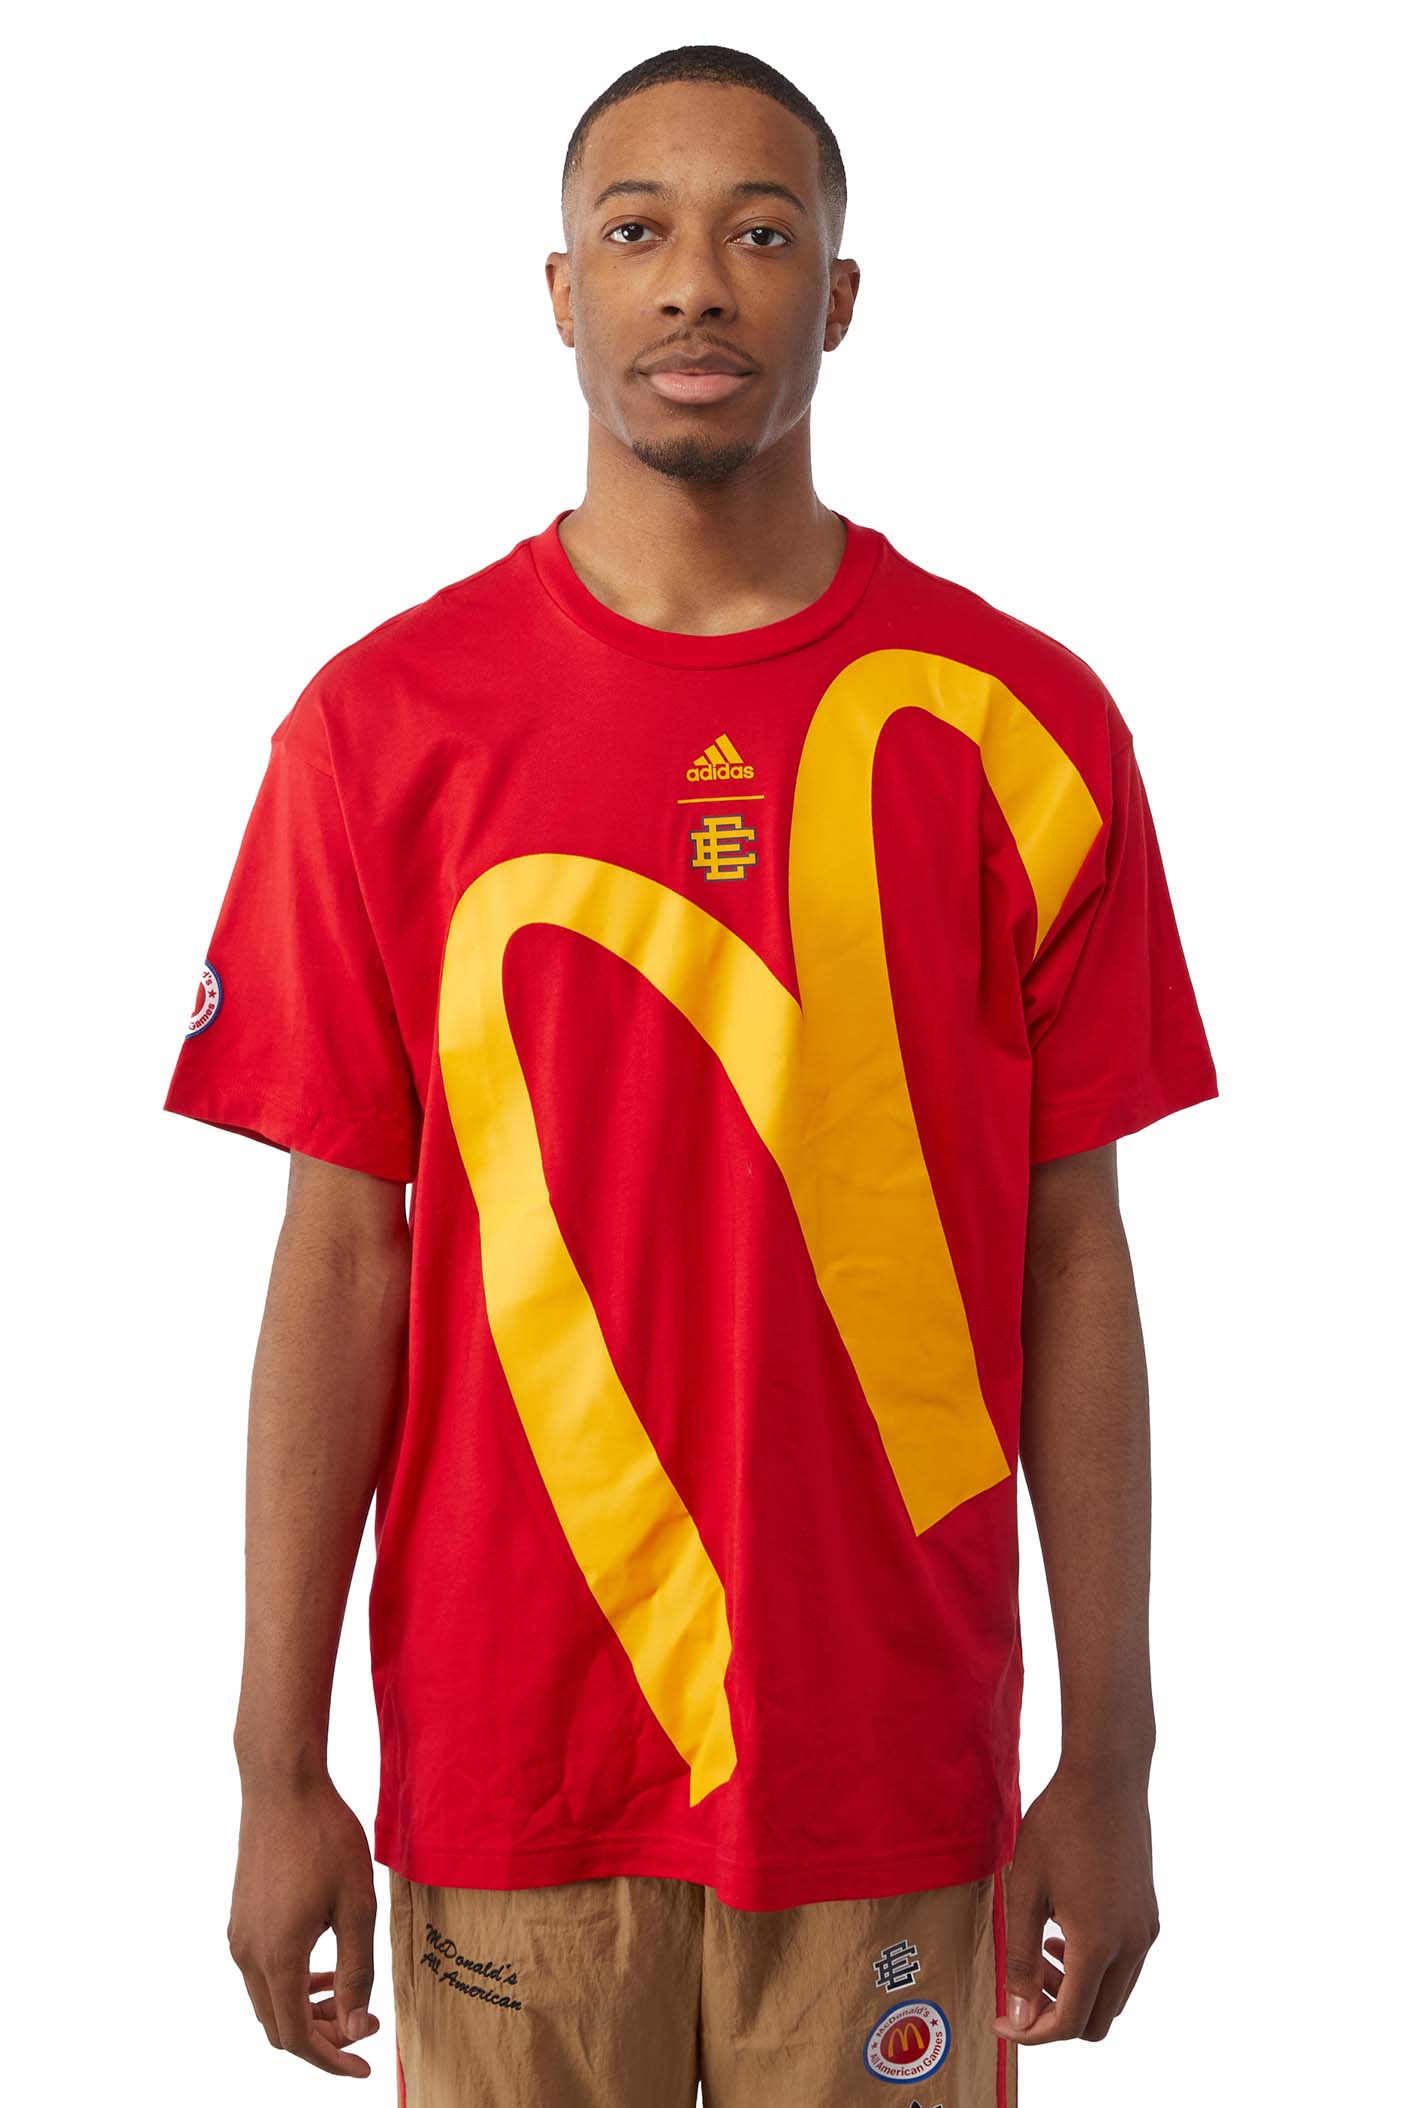 Eric Emanuel on designing the uniforms for the McDonald's All